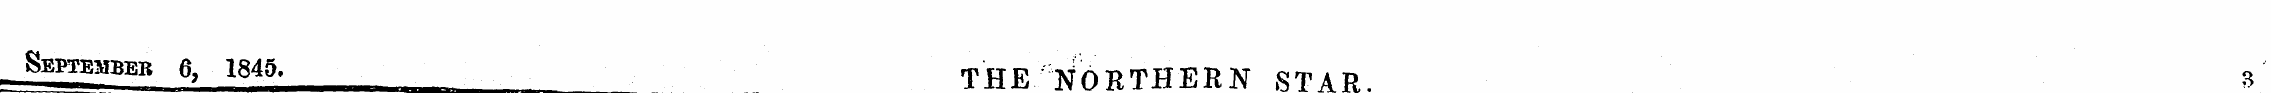 - Septembeb e, 1845. the Northern star. ...